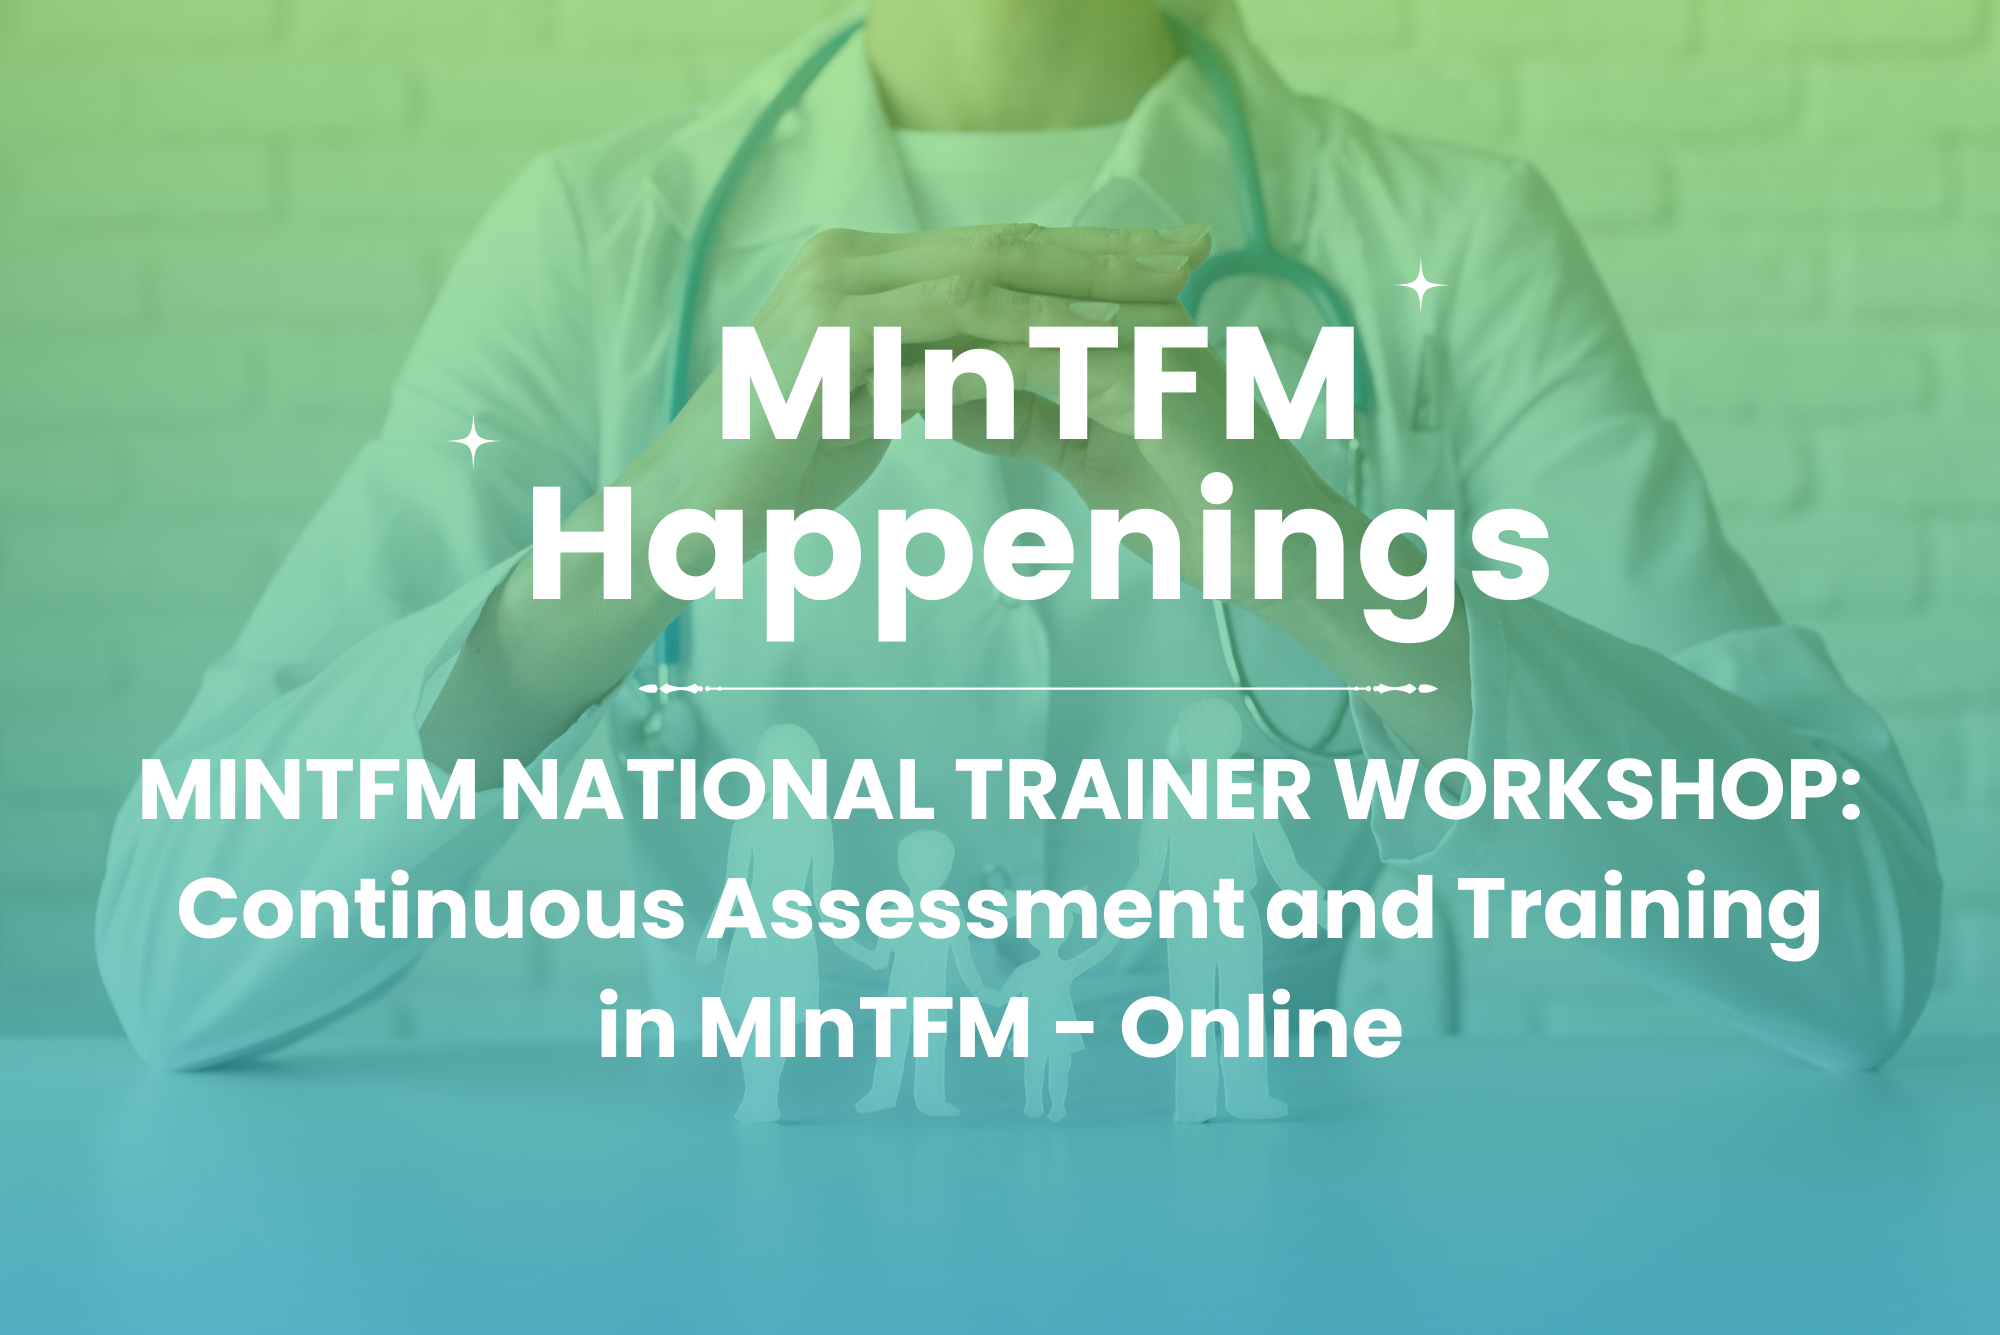 MINTFM NATIONAL TRAINER WORKSHOP: Continuous Assessment and Training in MInTFM – Online blog image